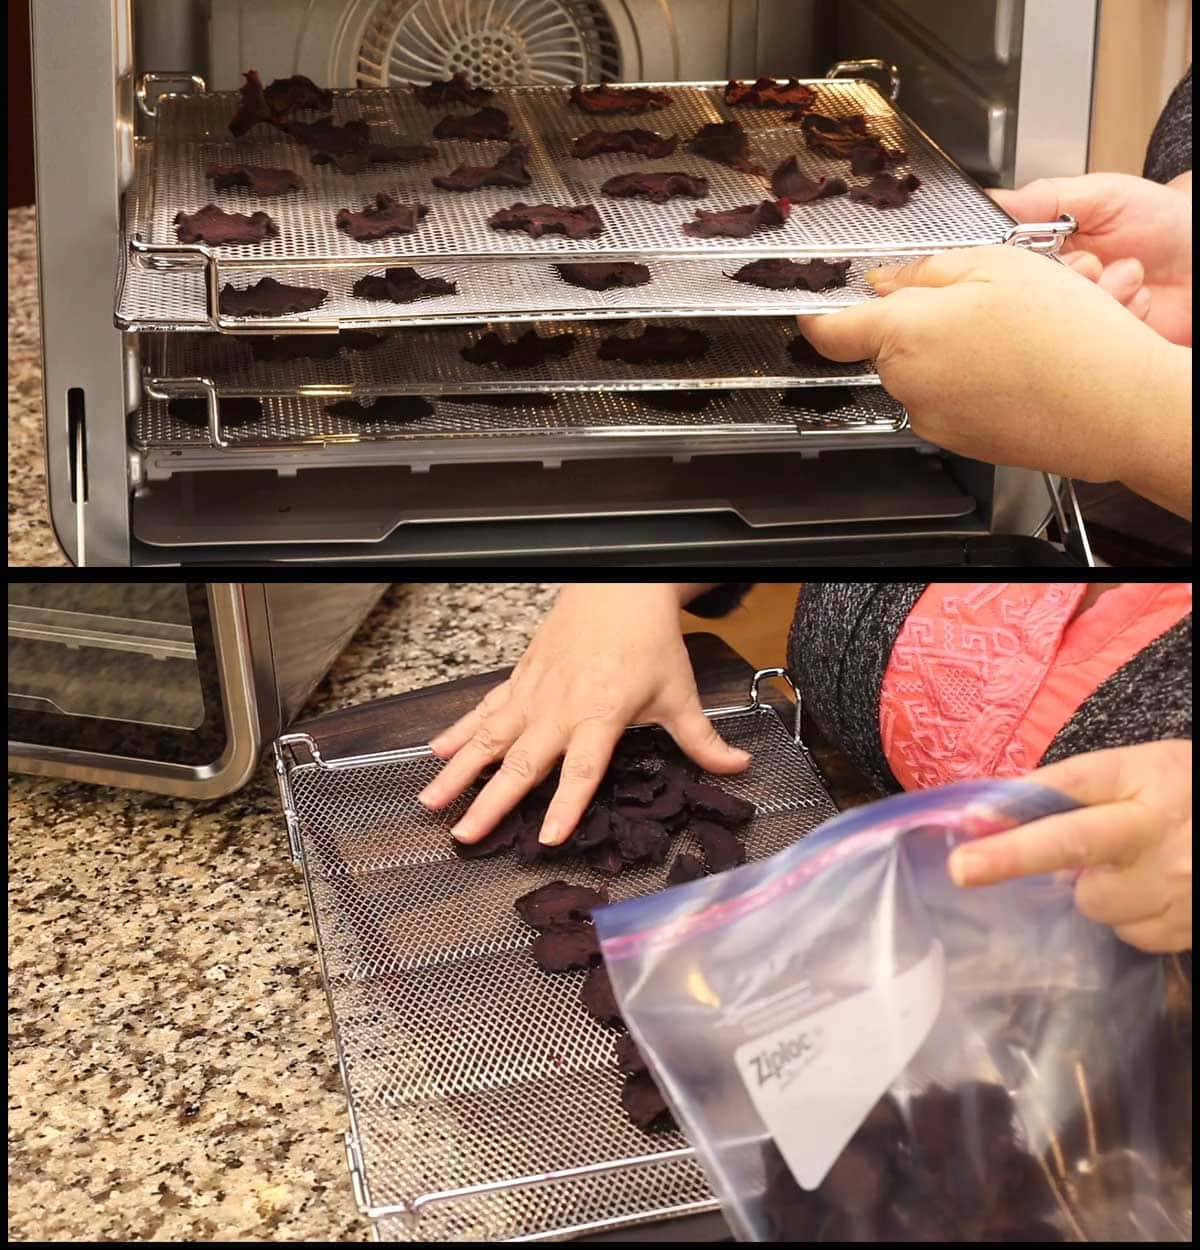 removing dehydrating trays and putting dehydrated beets into a ziplock bag.